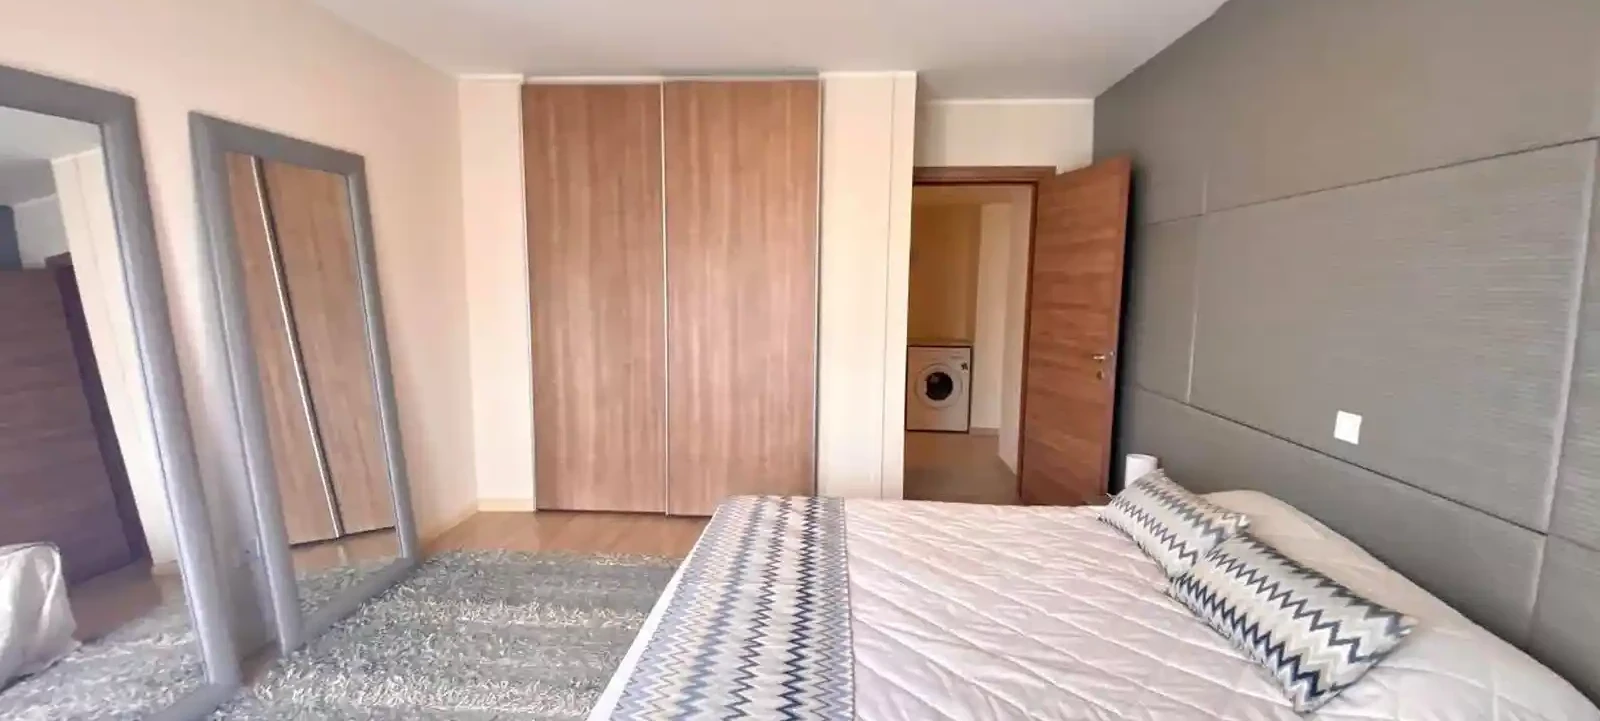 1-bedroom apartment to rent €1.500, image 1